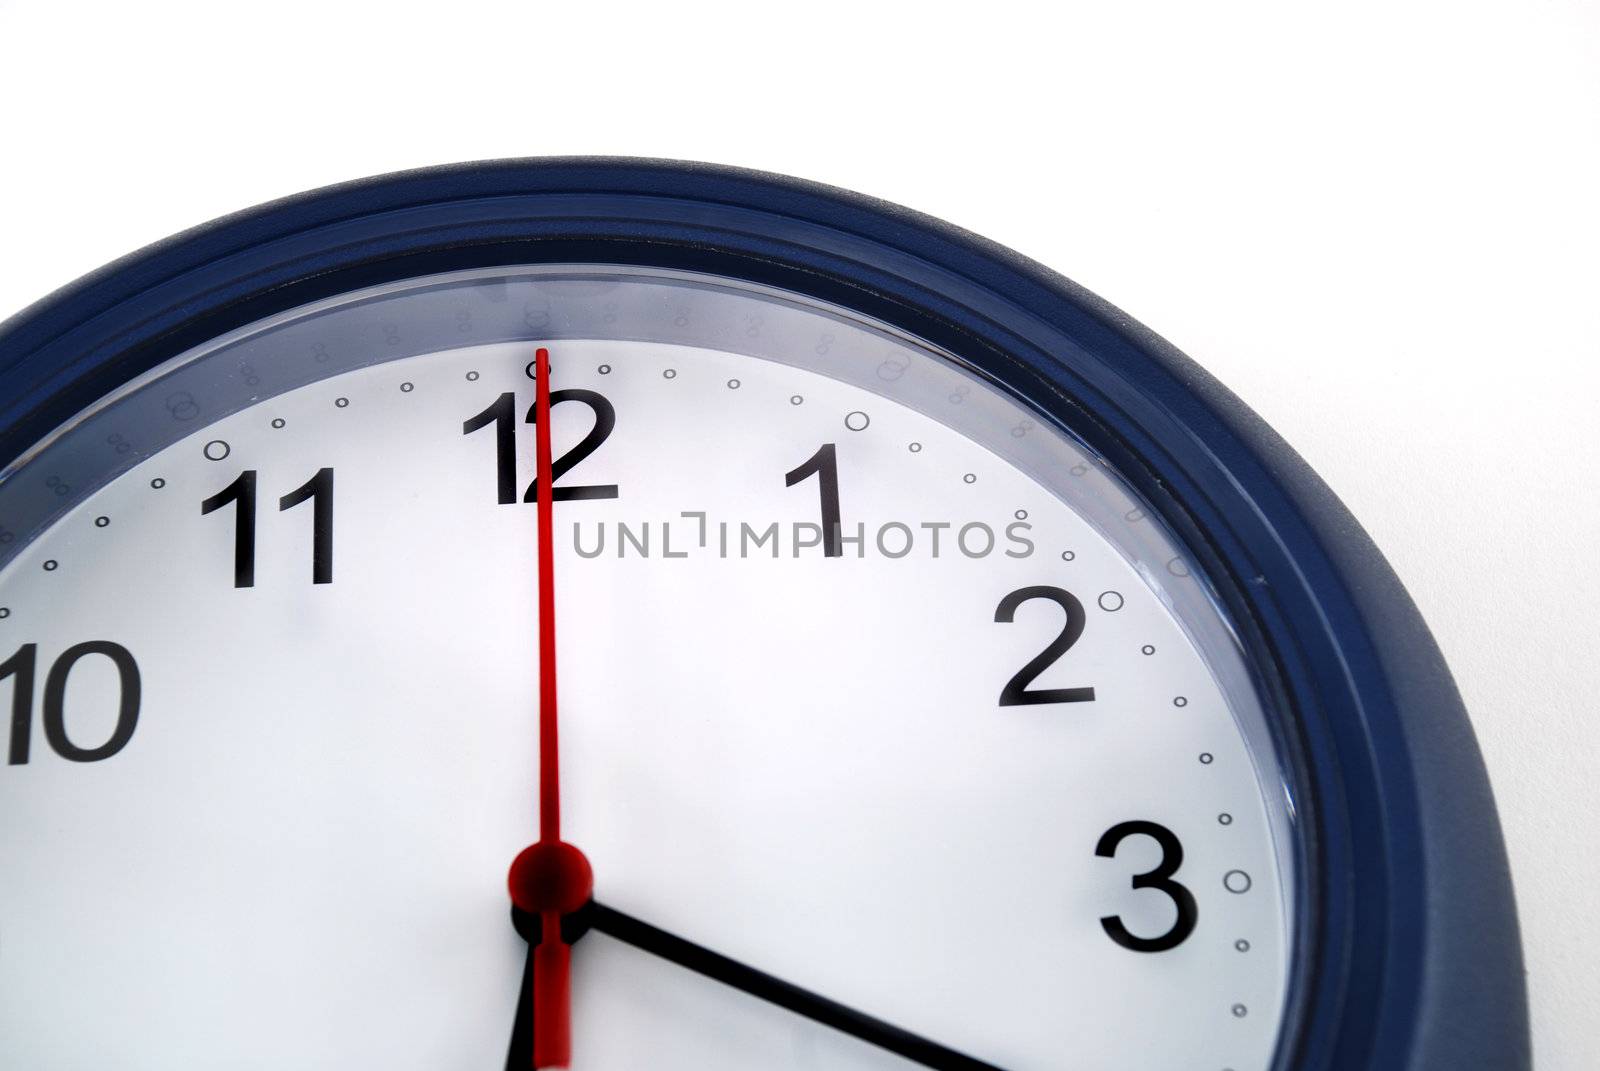 Pictures of a clock showing the passing to time